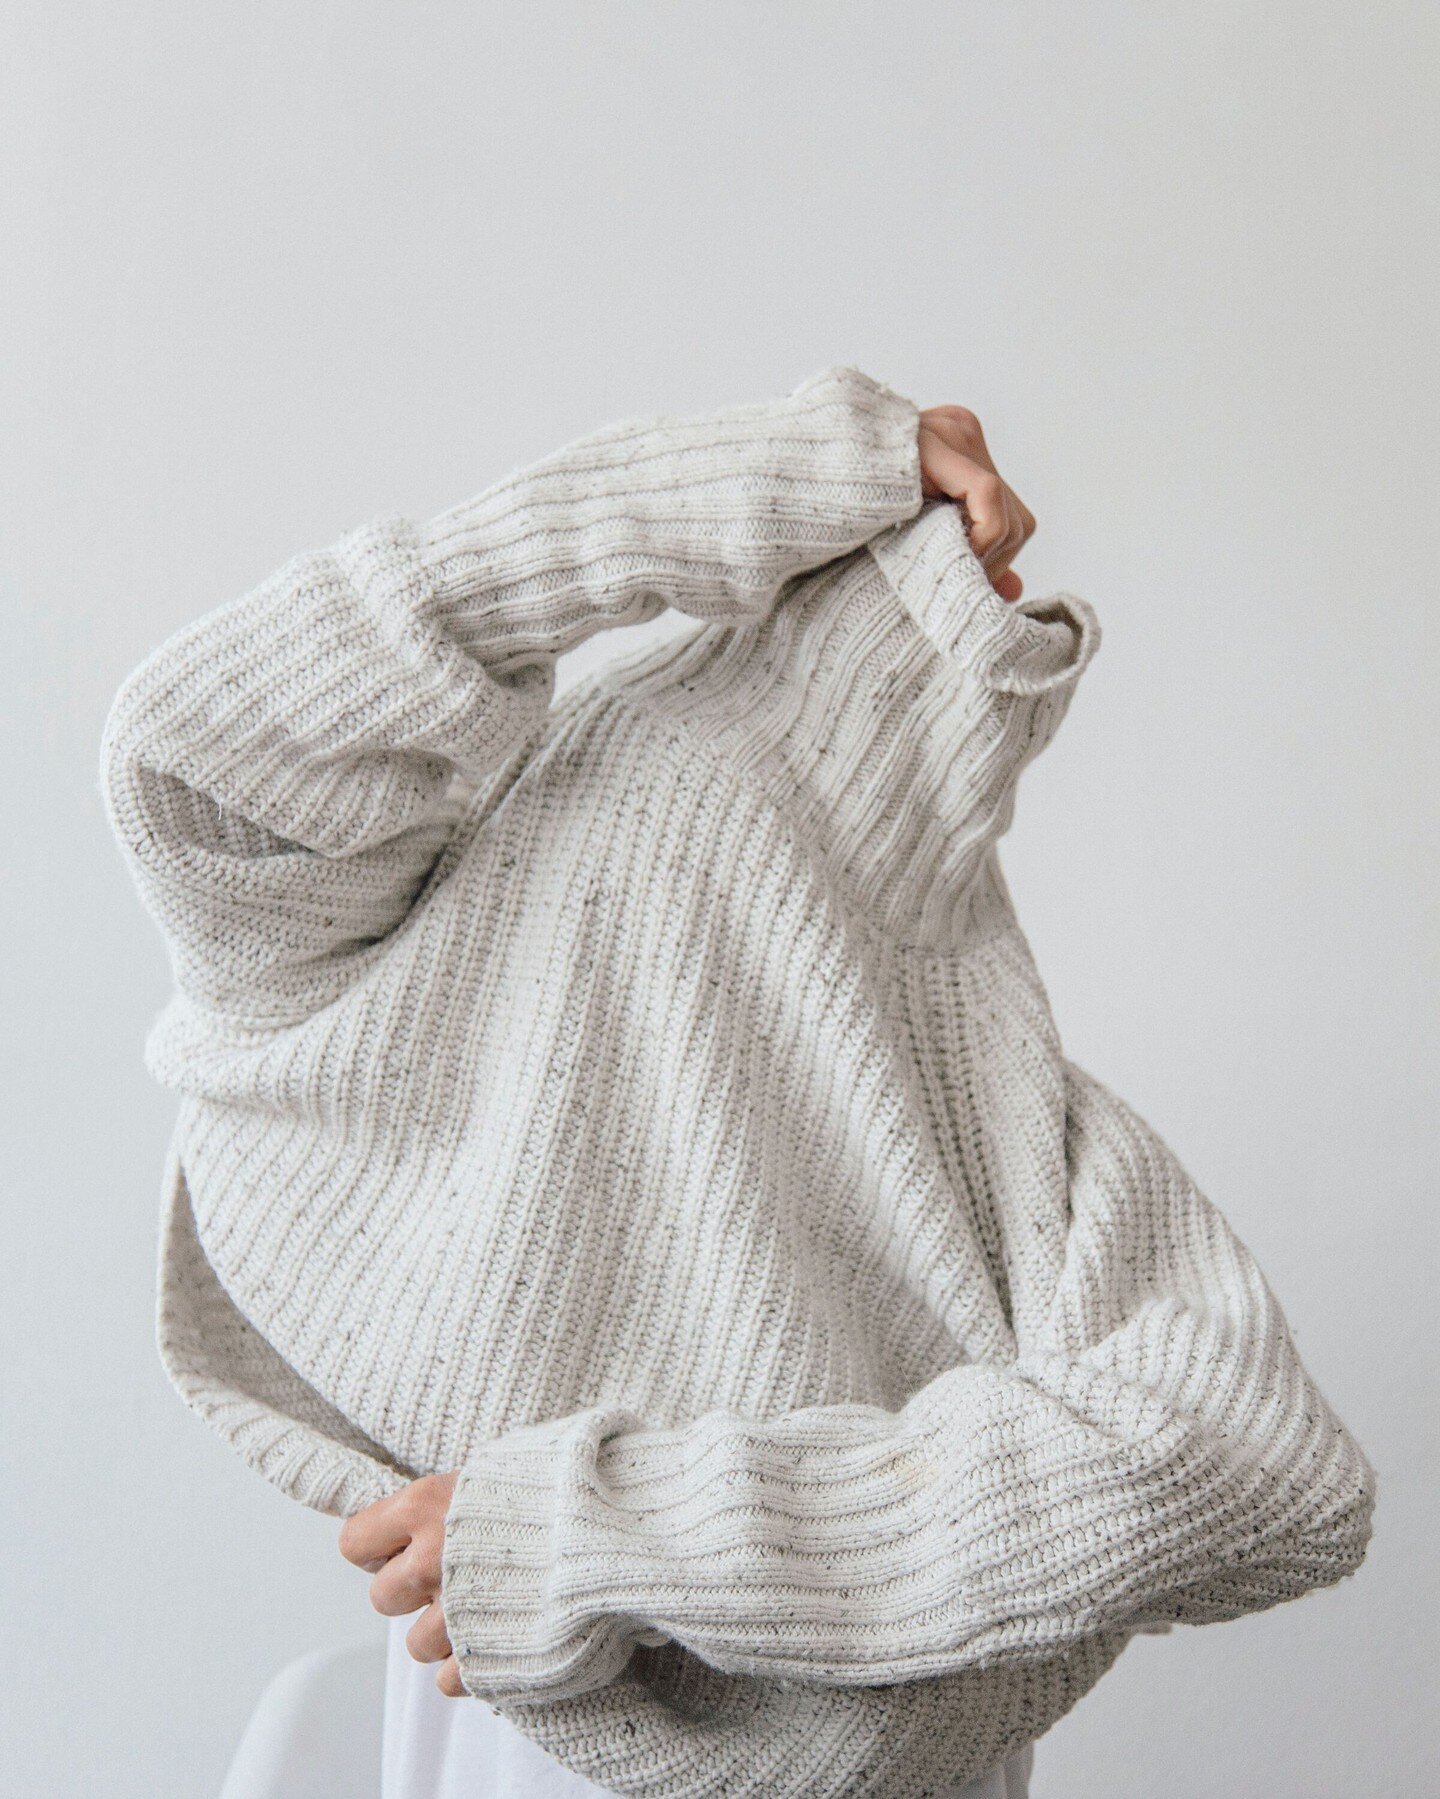 🌕 Feeling all sorts of ways? Yeah. The weather, circadian rhythm, goings-on in the world... It's okay to not know how to sort this all out. Just your reminder. Eventually you'll get that sweater on (or off).
-
-
-
Love,
Rebecca
-
Photo by Mukuko Stu